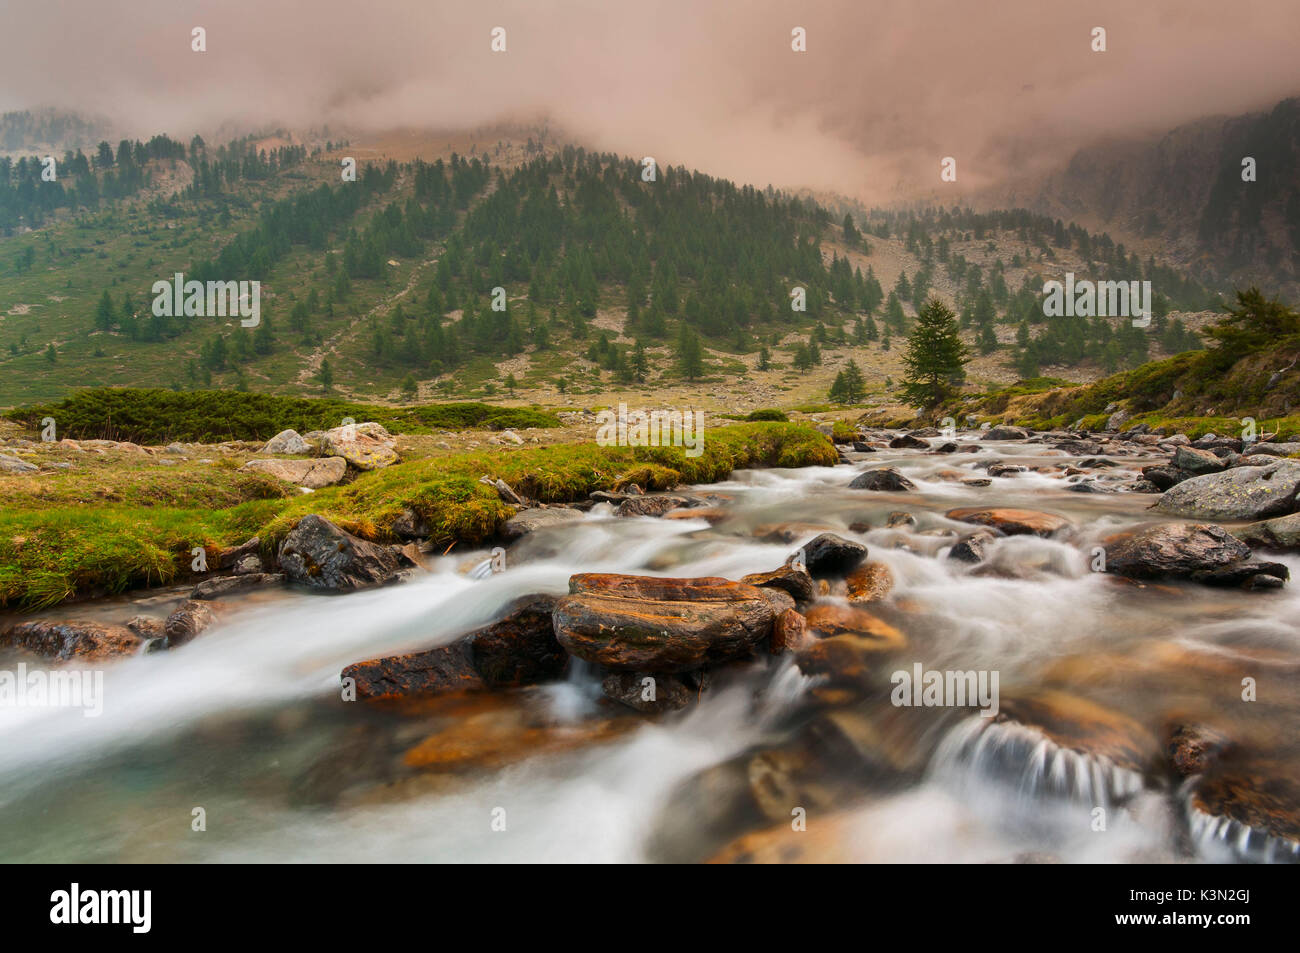 Italy, Piedmont, Cuneo District, Gesso Valley, Alpi Marittime Natural Park, Gesso torrent on a cloudy day Stock Photo